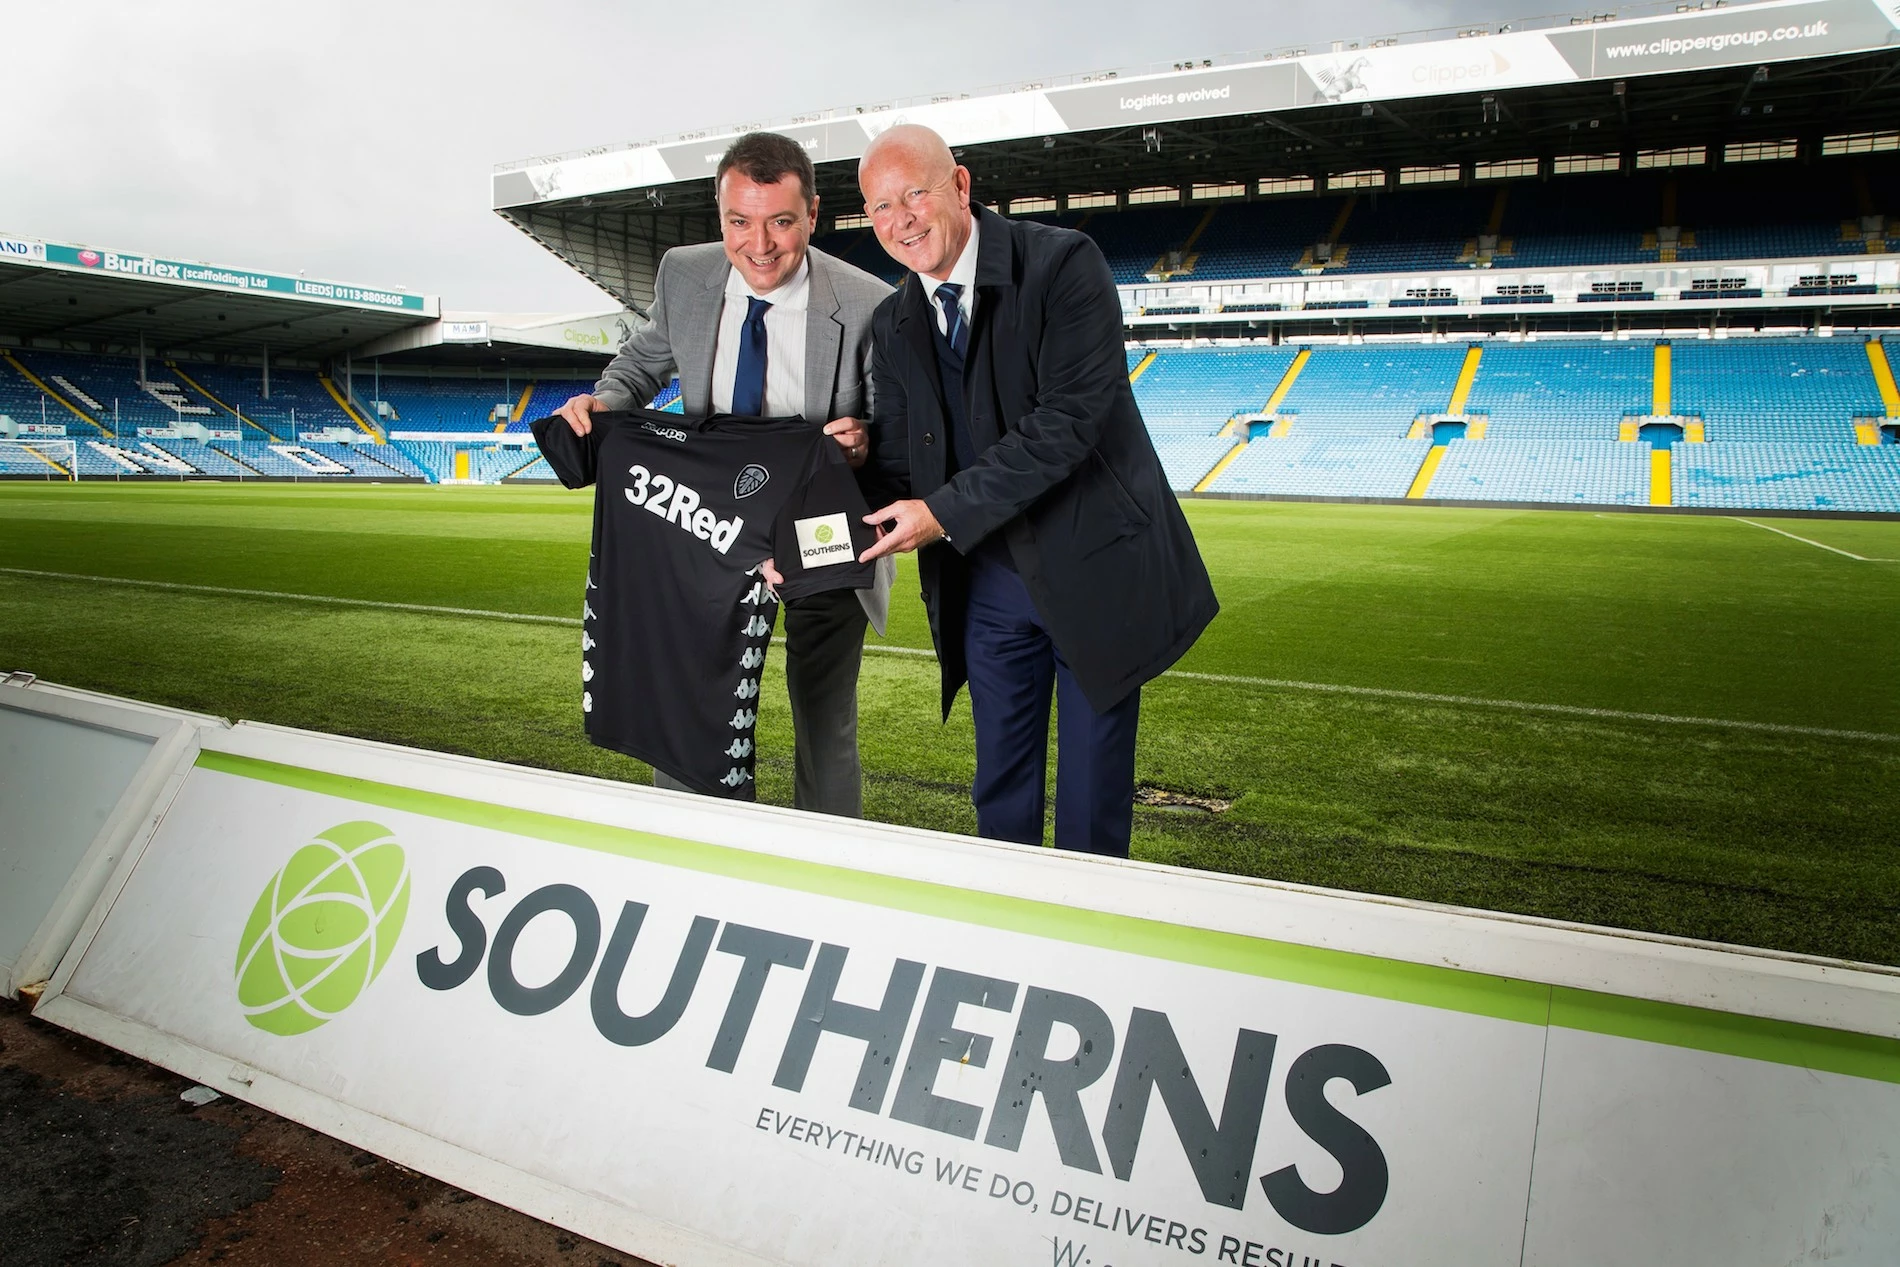 Southerns announced as Leeds United Shirt Sleeve Sponsors.